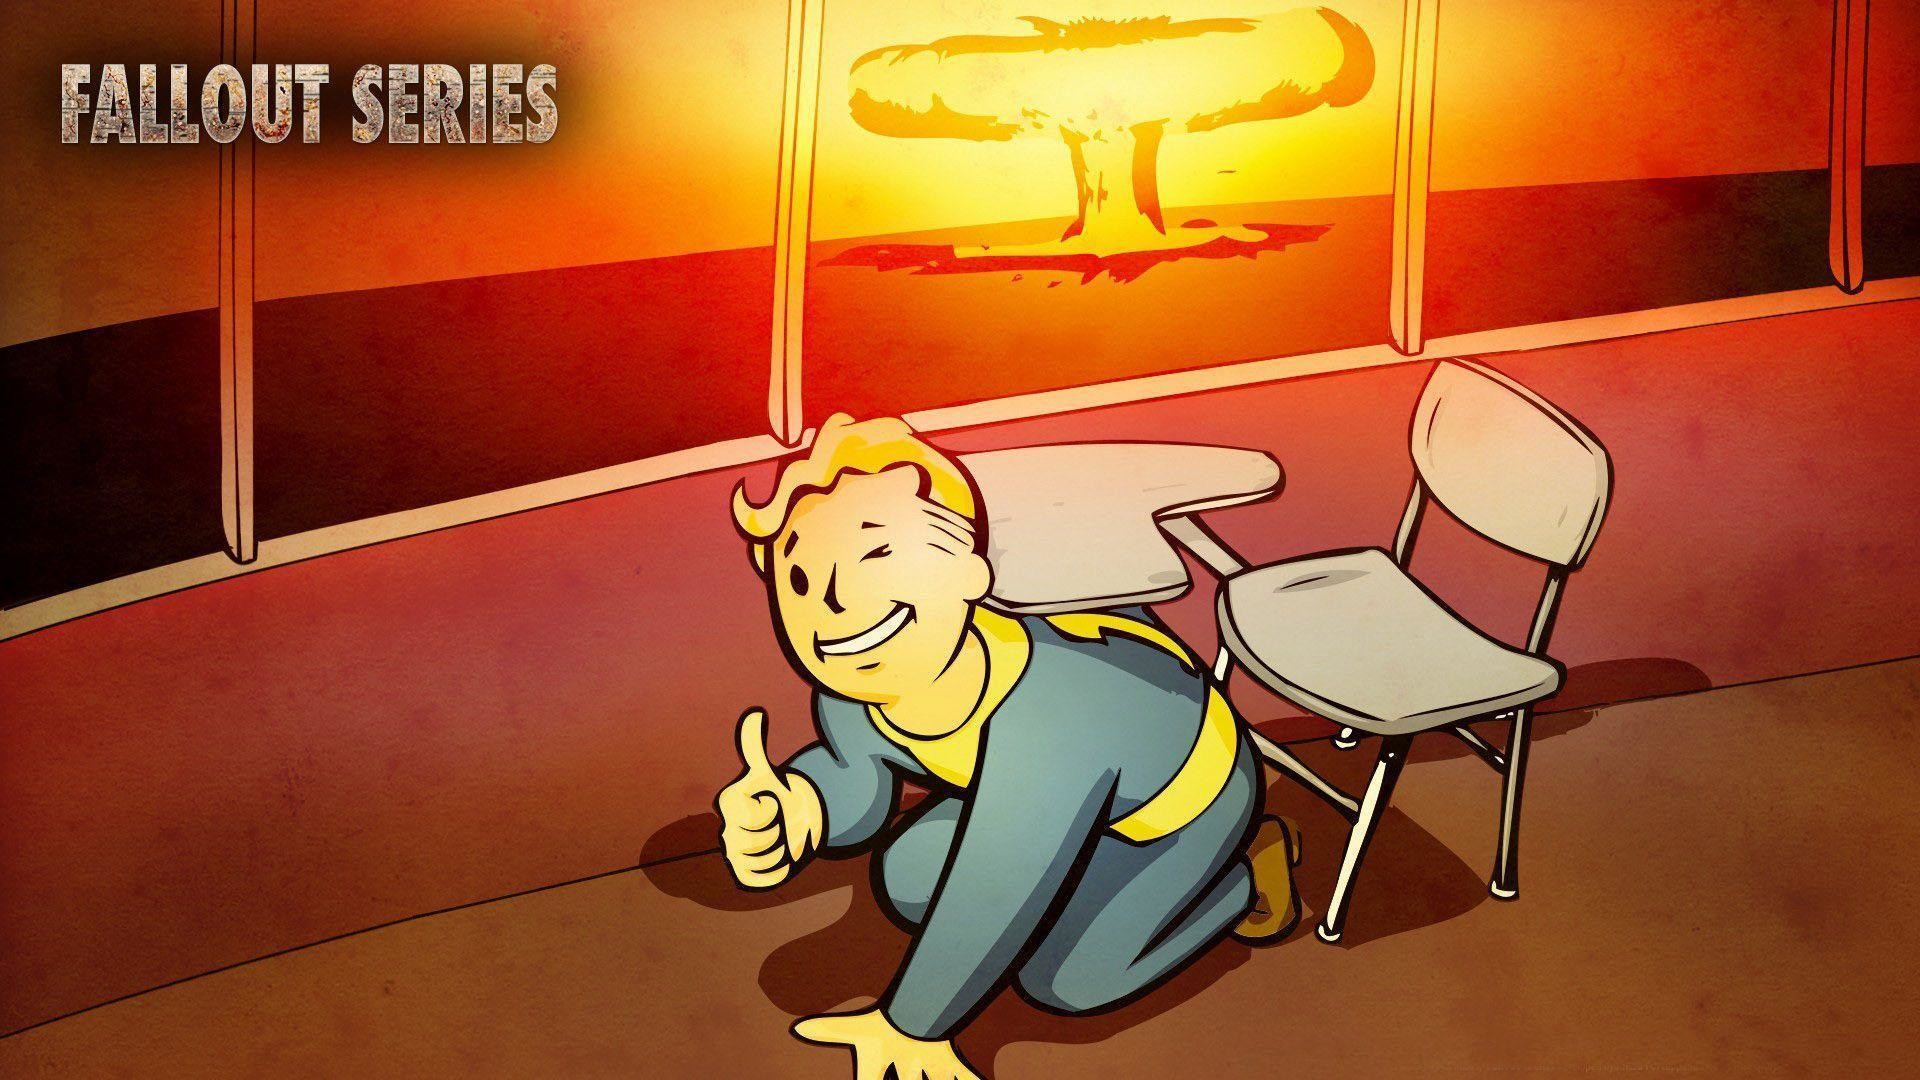 1920x1080 Vault Girl Fallout Wallpapers - WallpaperSafari Vault Girl Fallout  Wallpapers - WallpaperSafari Wallpapers Fallout Group (80 ) ...